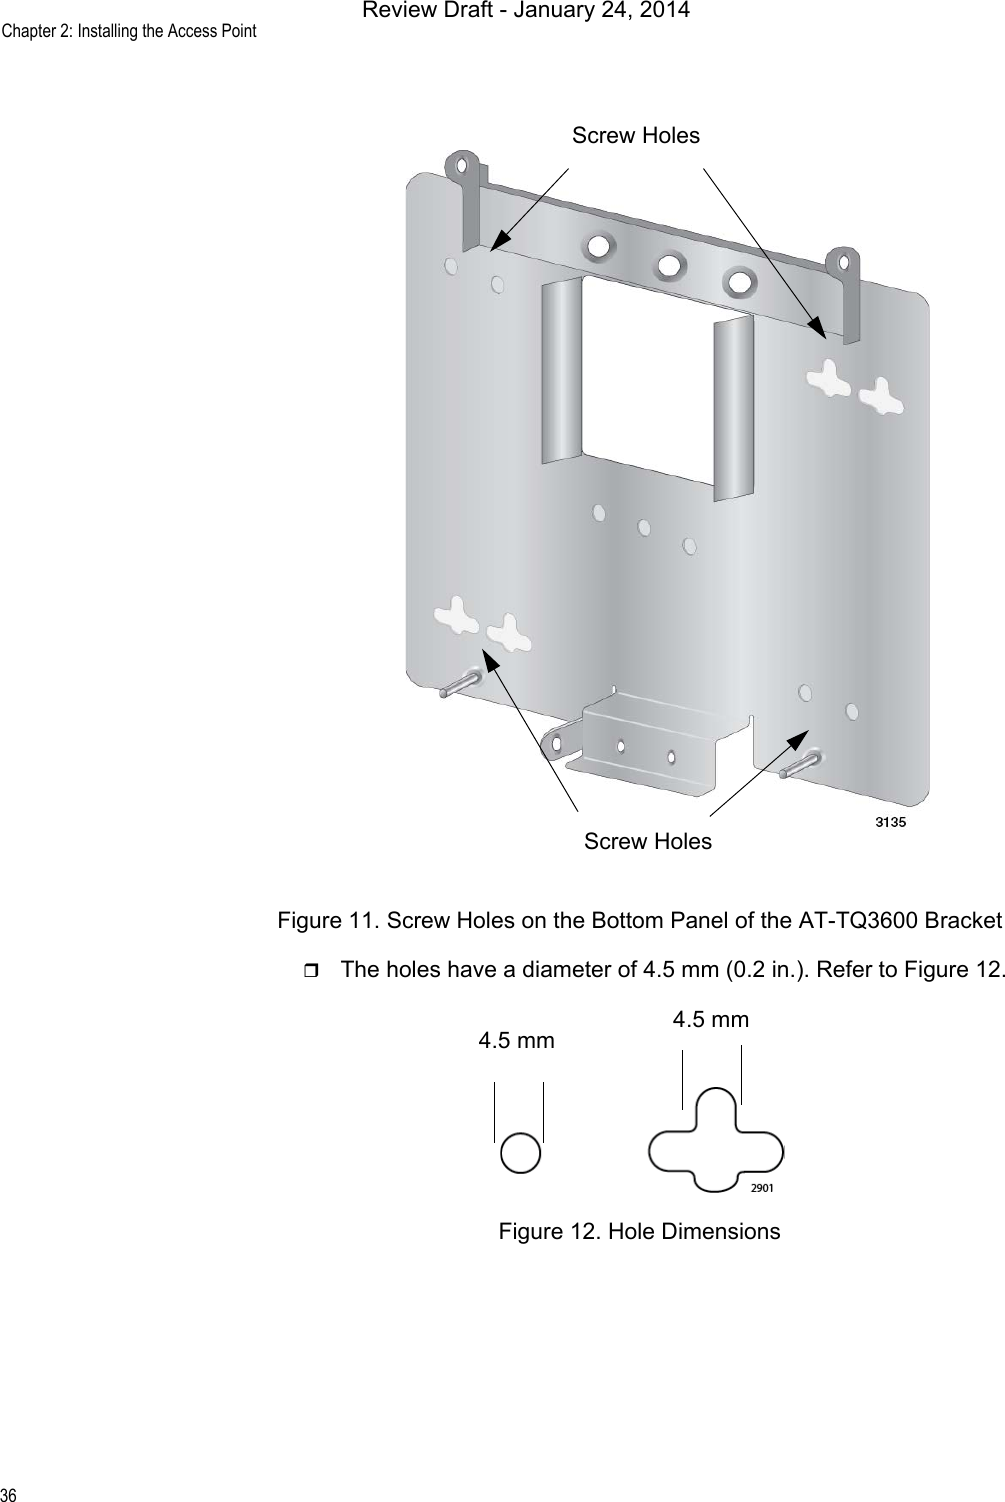 Chapter 2: Installing the Access Point36Figure 11. Screw Holes on the Bottom Panel of the AT-TQ3600 BracketThe holes have a diameter of 4.5 mm (0.2 in.). Refer to Figure 12.Figure 12. Hole DimensionsScrew HolesScrew Holes4.5 mm 4.5 mmReview Draft - January 24, 2014